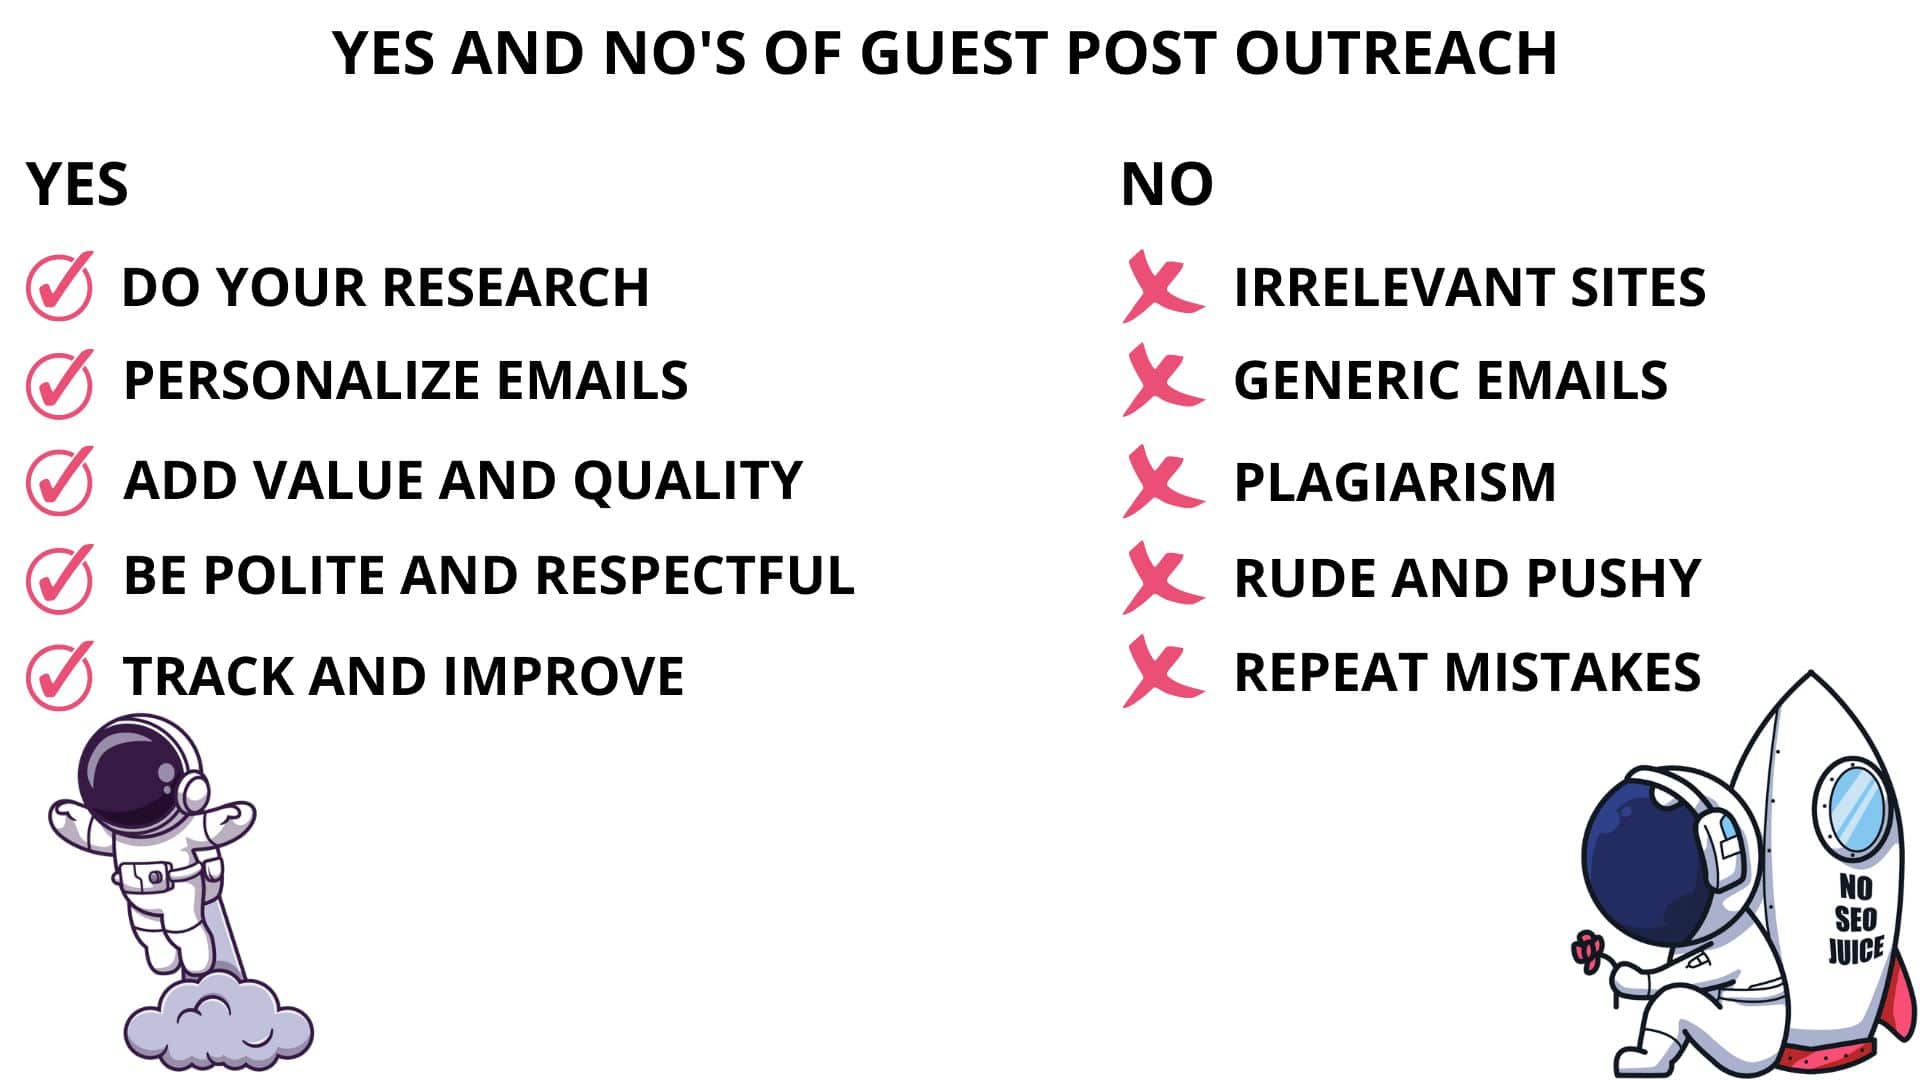 Here is a graphic for the yes and no's in the guest post outreach process.